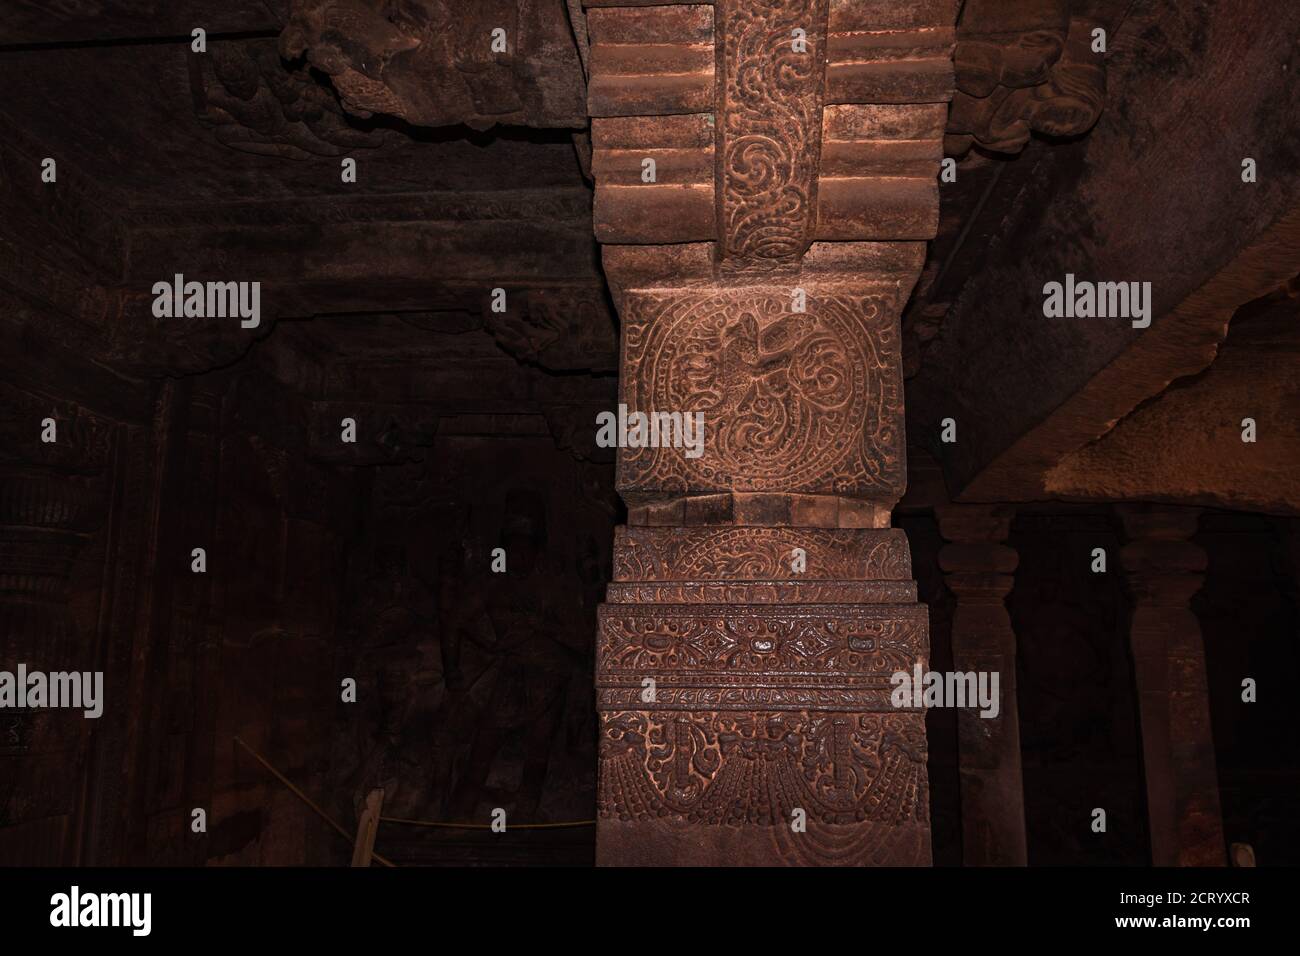 badami cave temple interior pillars stone art in details image is taken at badami karnataka india. it is unesco heritage site and place of amazing cha Stock Photo